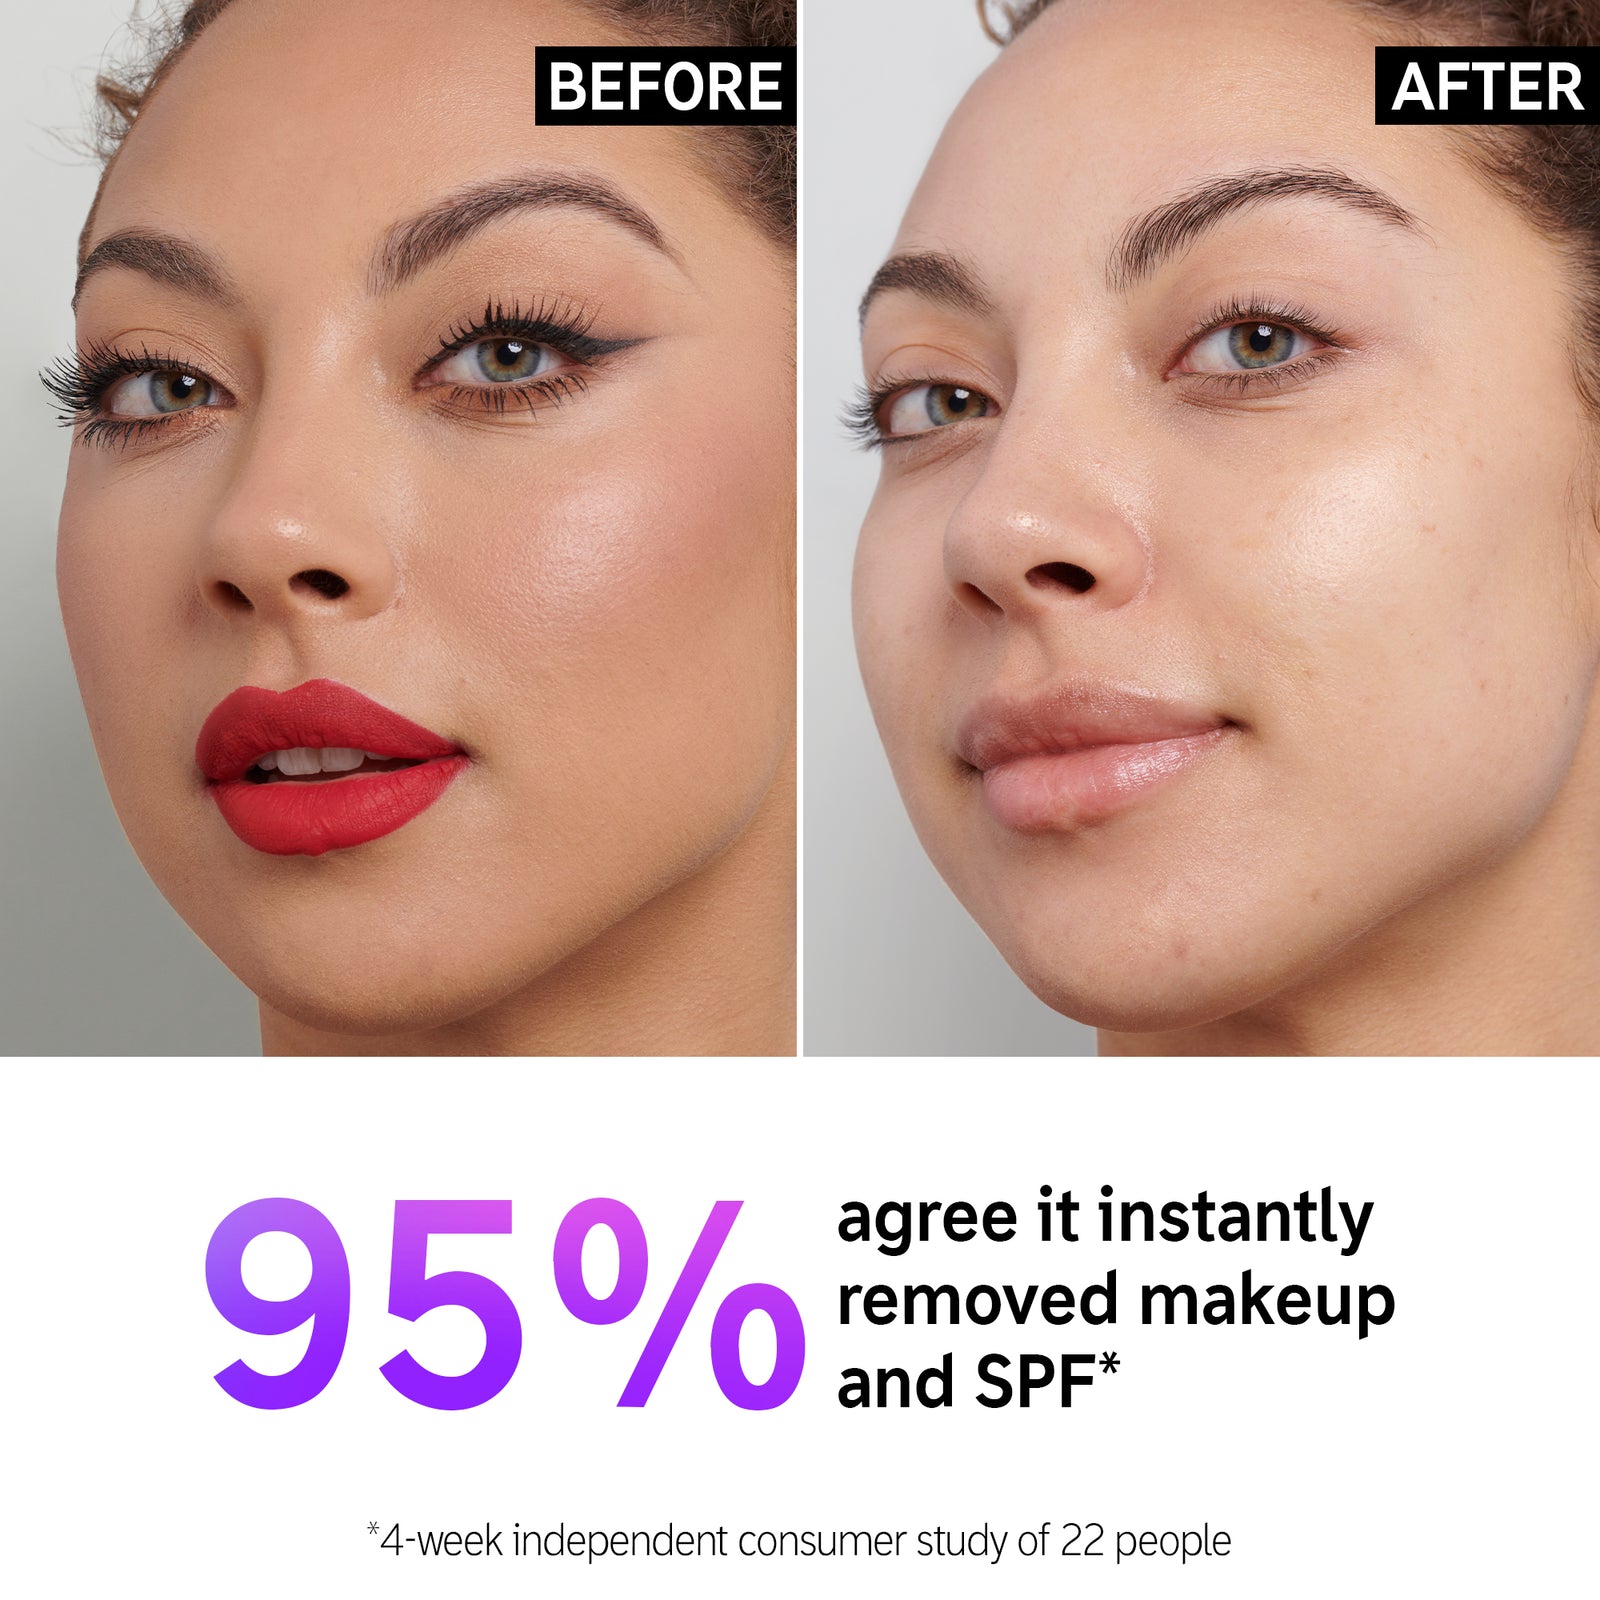 Before and after side by side shot of model using Oat Cleansing Balm to remove makeup with text '95% agree it instantly removed makeup and SPF*'